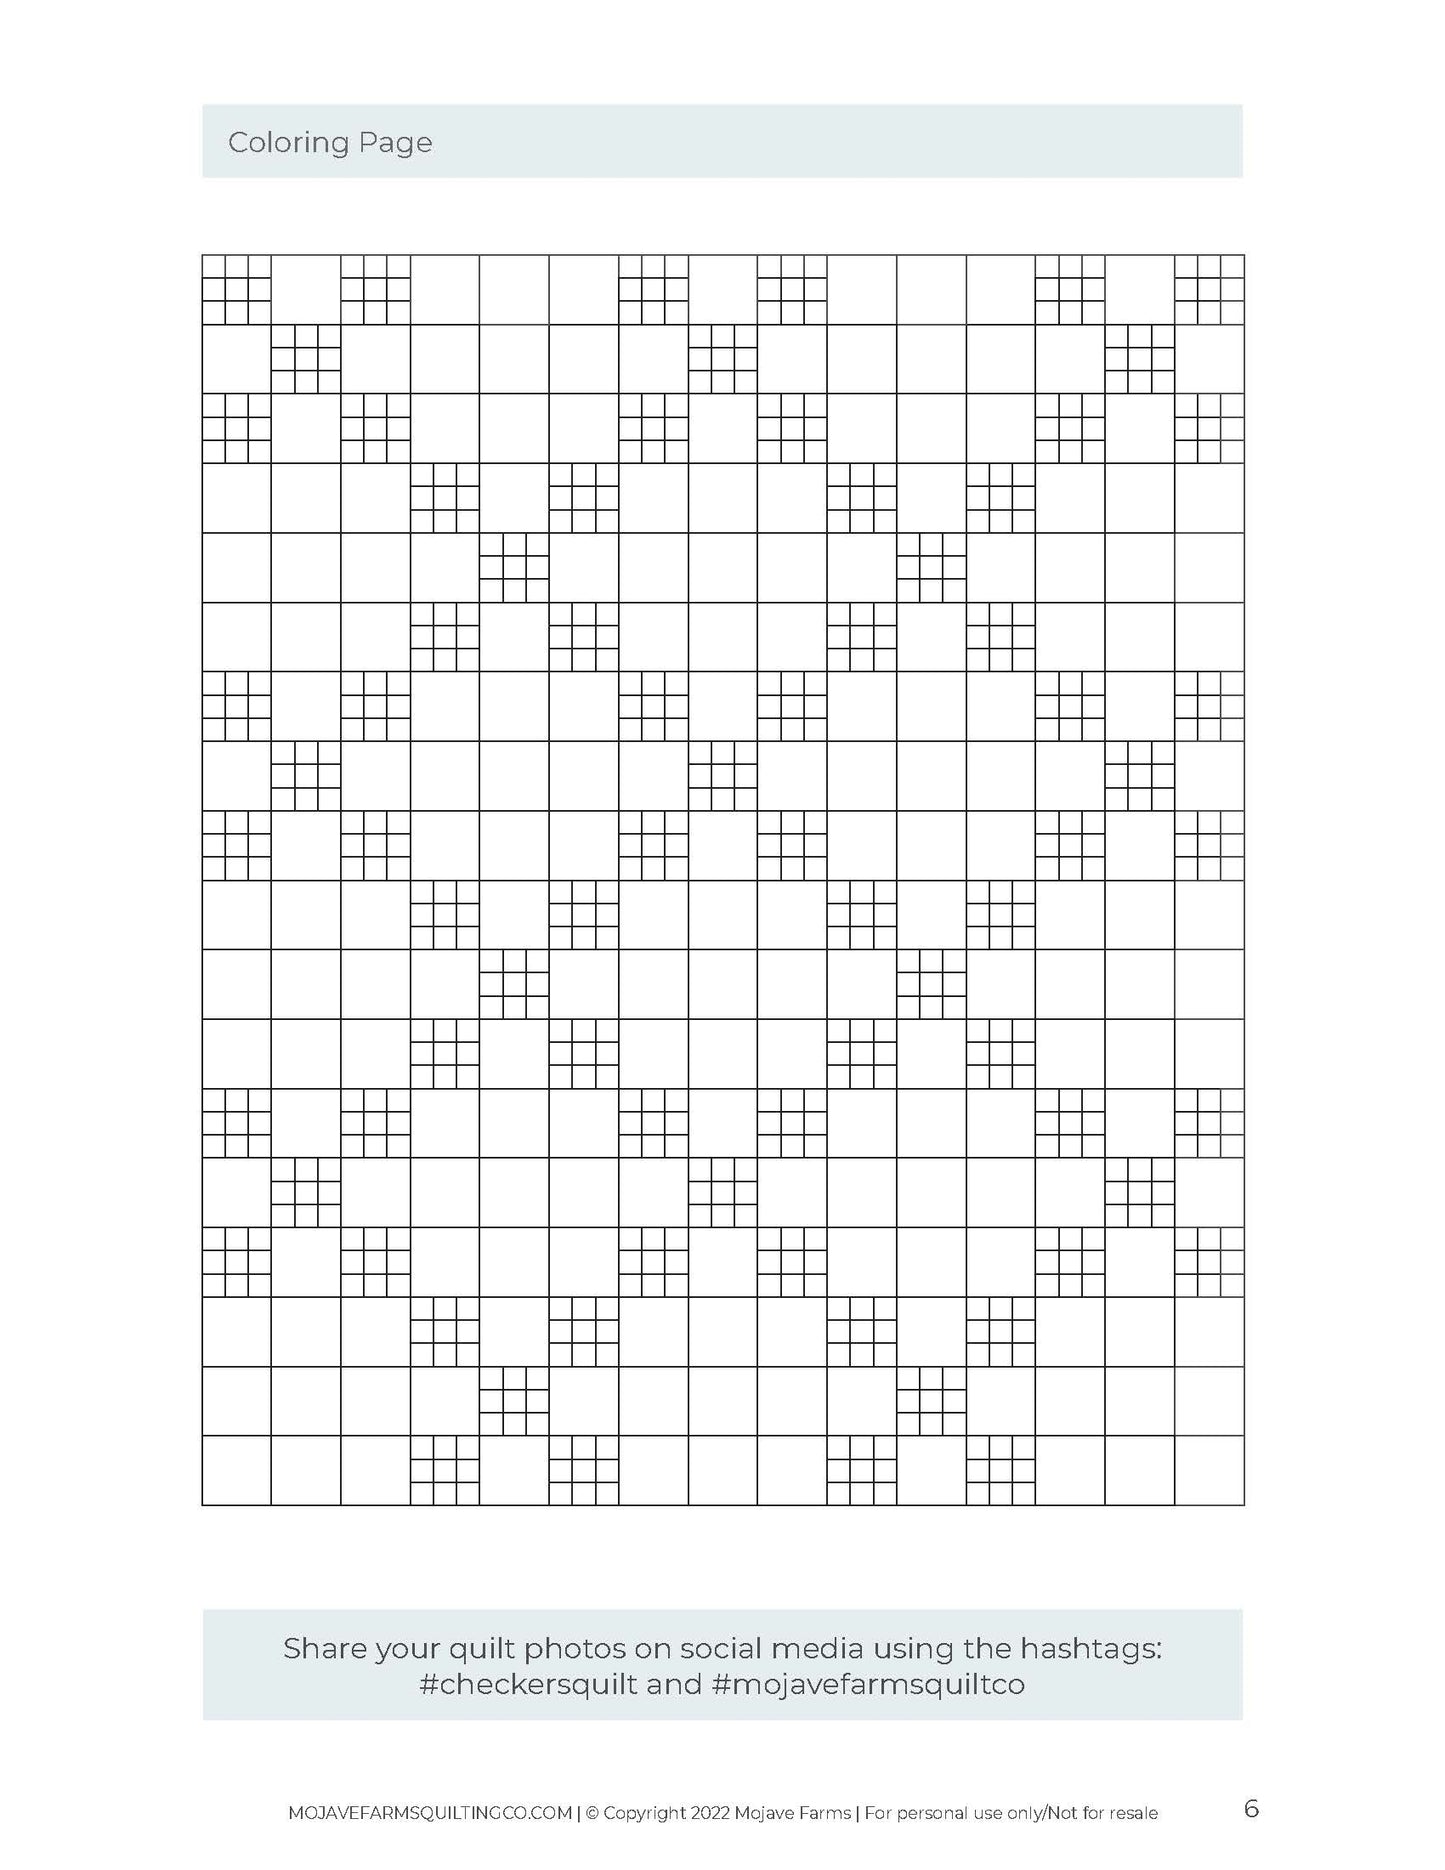 Checkers Quilt Coloring Page